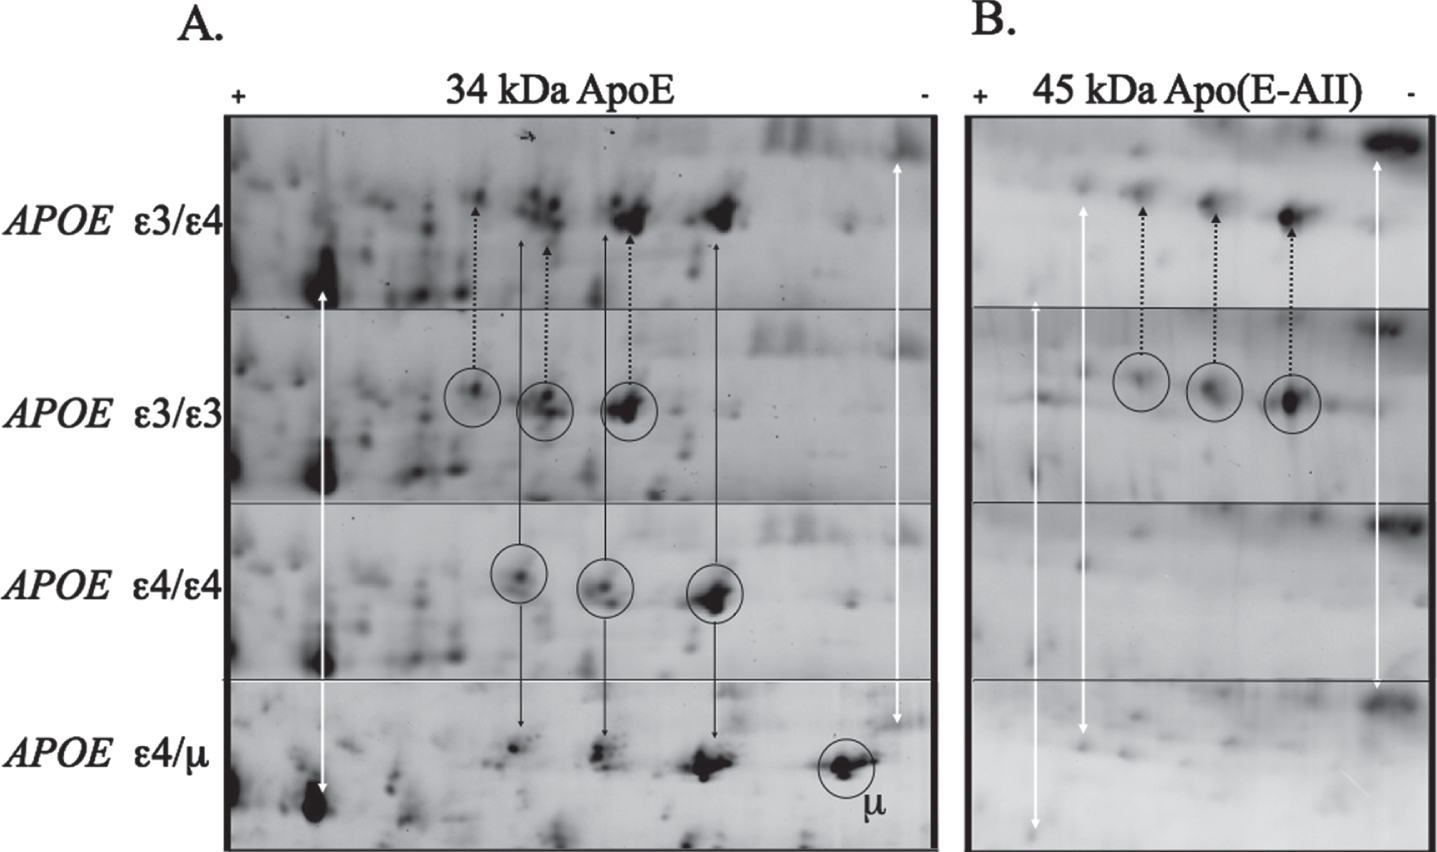 Large format 2D gel (pH range 4.7–5.9) comparing the ApoE proteins from different genotypes. ApoE protein has three main groups of protein isoforms (circled, A). The white arrows indicate representative non-apoE “landmark” spots, showing that there is no appreciable pI shift between the gels. Comparison of and ɛ3 and ɛ4 carriers demonstrates the well know shift in isoelectric point between different apoE forms as well as the shift introduced by the missense mutation of cys to arginine. The additional mutation of Q222K (μ) induces a basic shift of similar magnitude as the cys to arg mutation. ApoE ɛ2 and ɛ3 protein variants are known to form a 45 kDa complex with apoAII:Aβ. This complex is present in the ɛ3 carriers but not in the Q222K (ɛ4/μ)carrier (B).